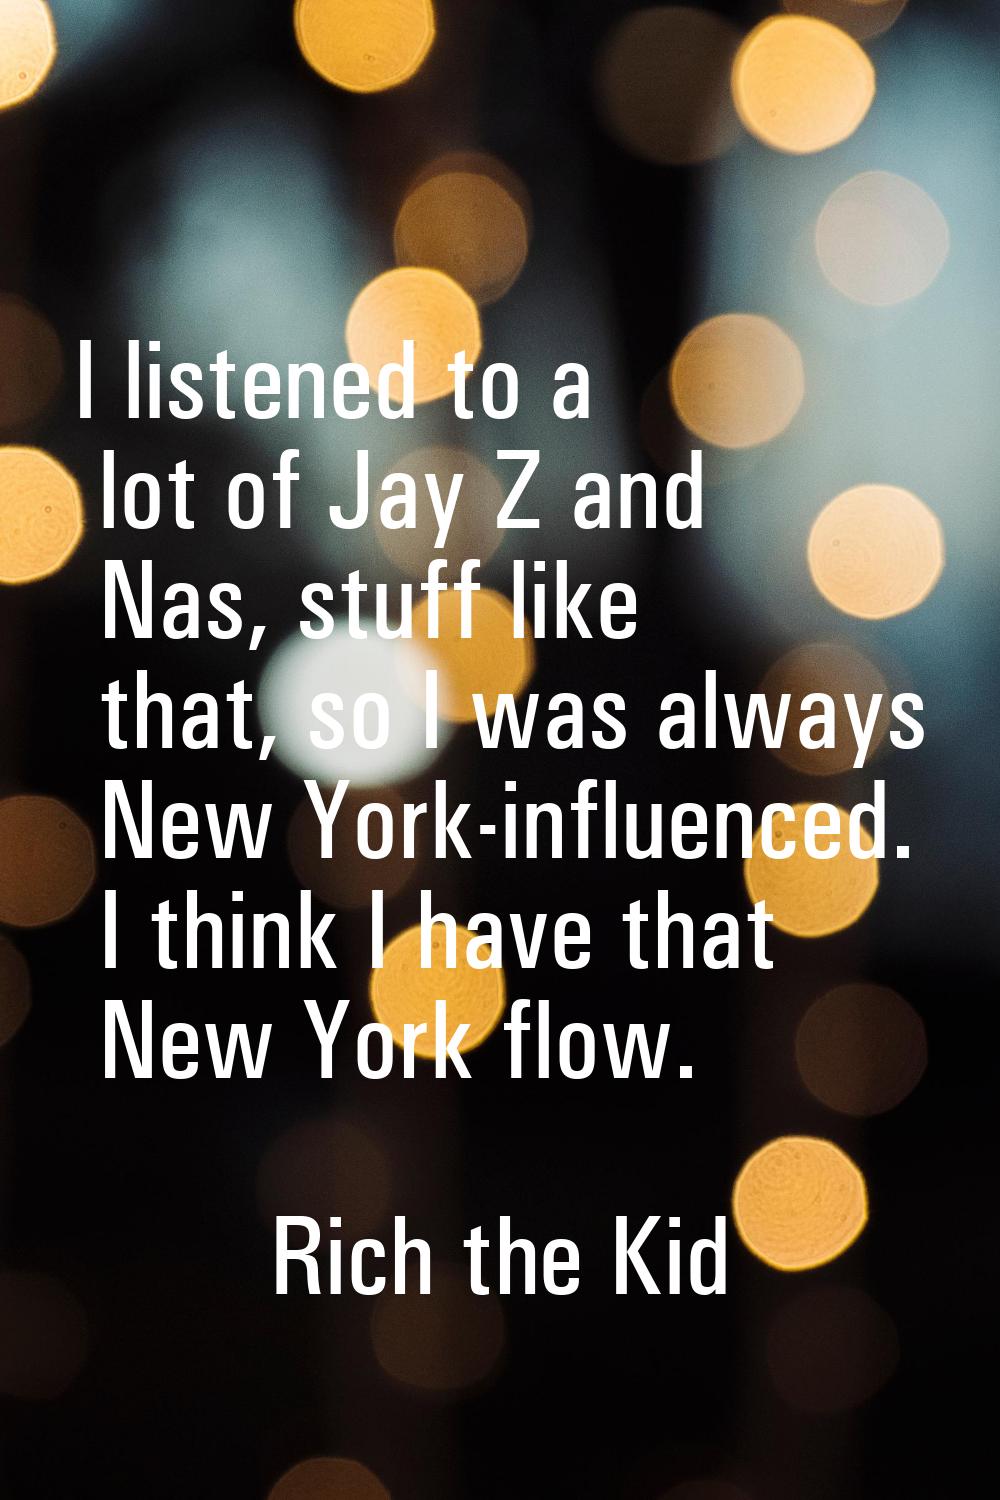 I listened to a lot of Jay Z and Nas, stuff like that, so I was always New York-influenced. I think